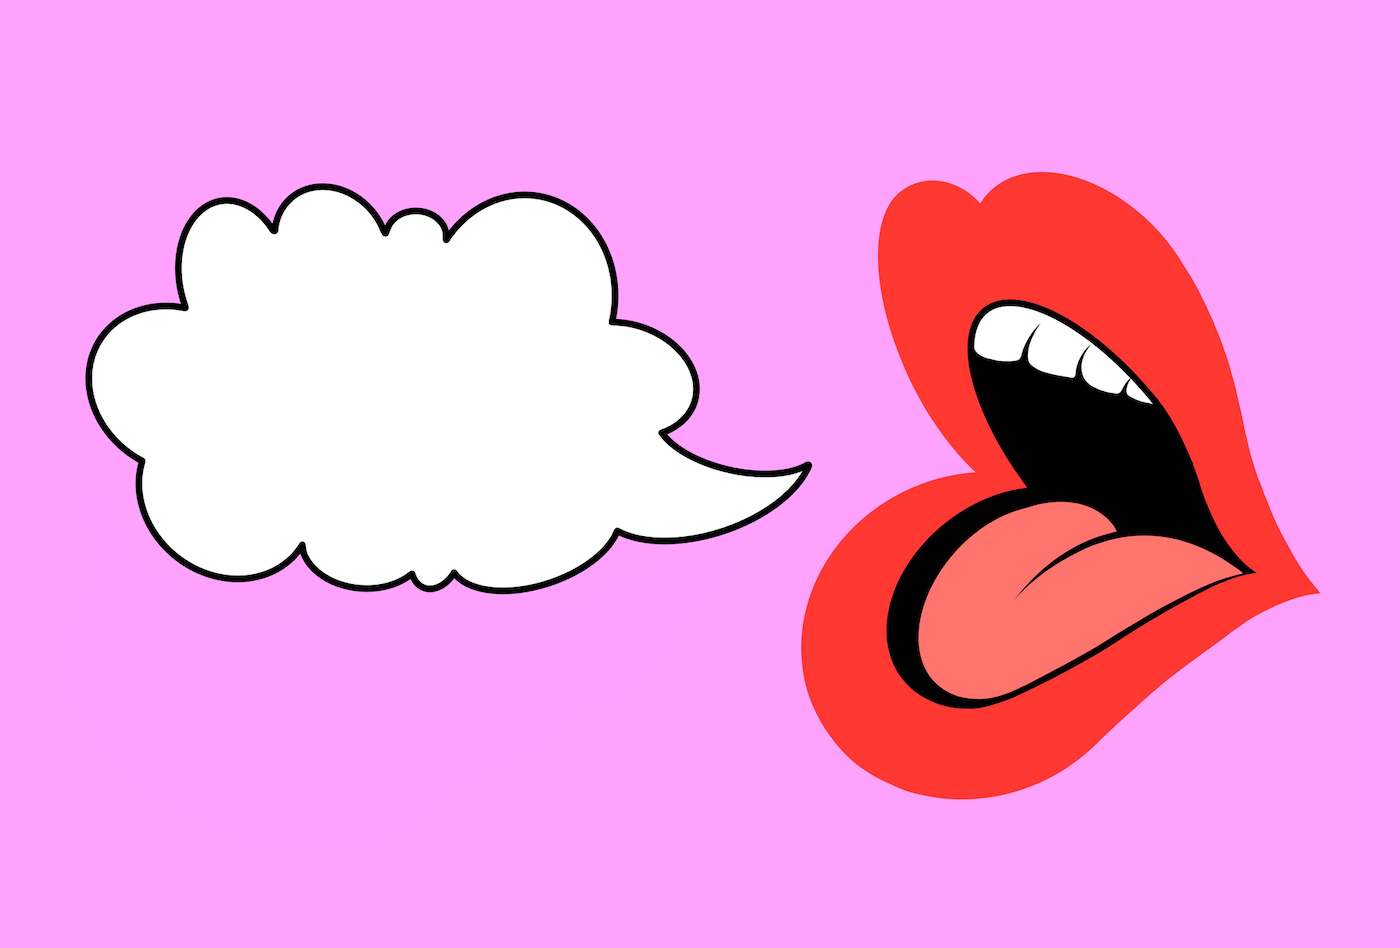 Clip art background for talking lips